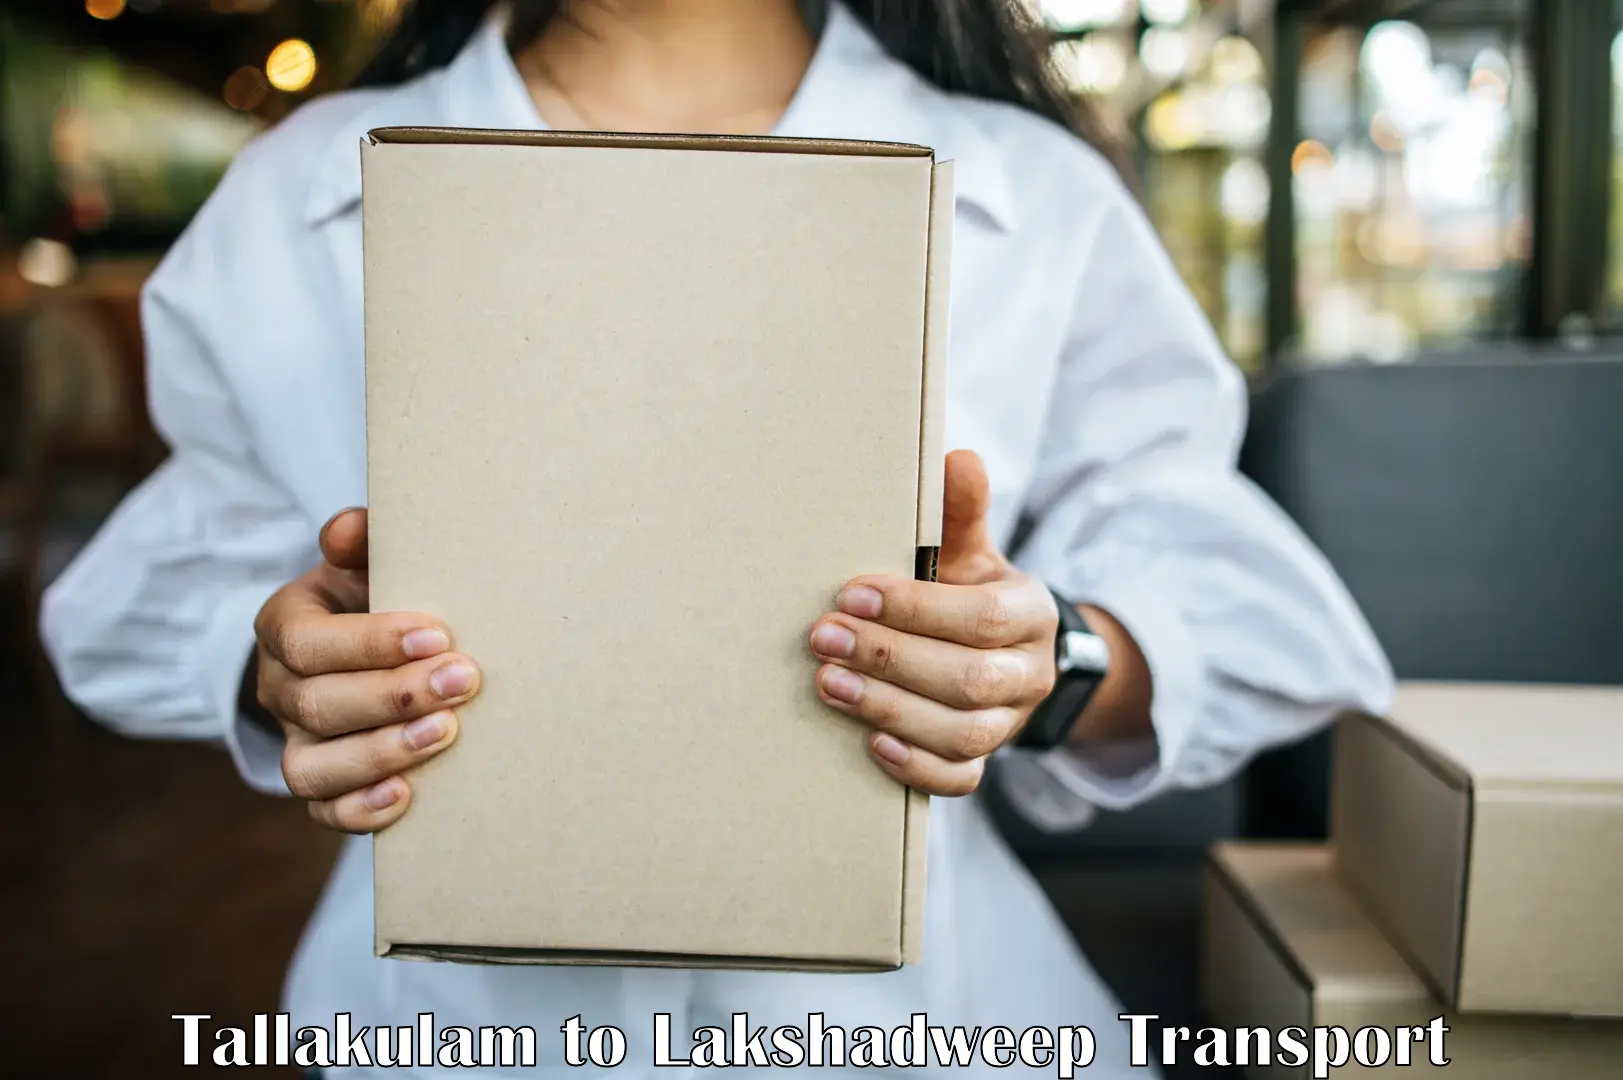 Daily parcel service transport Tallakulam to Lakshadweep